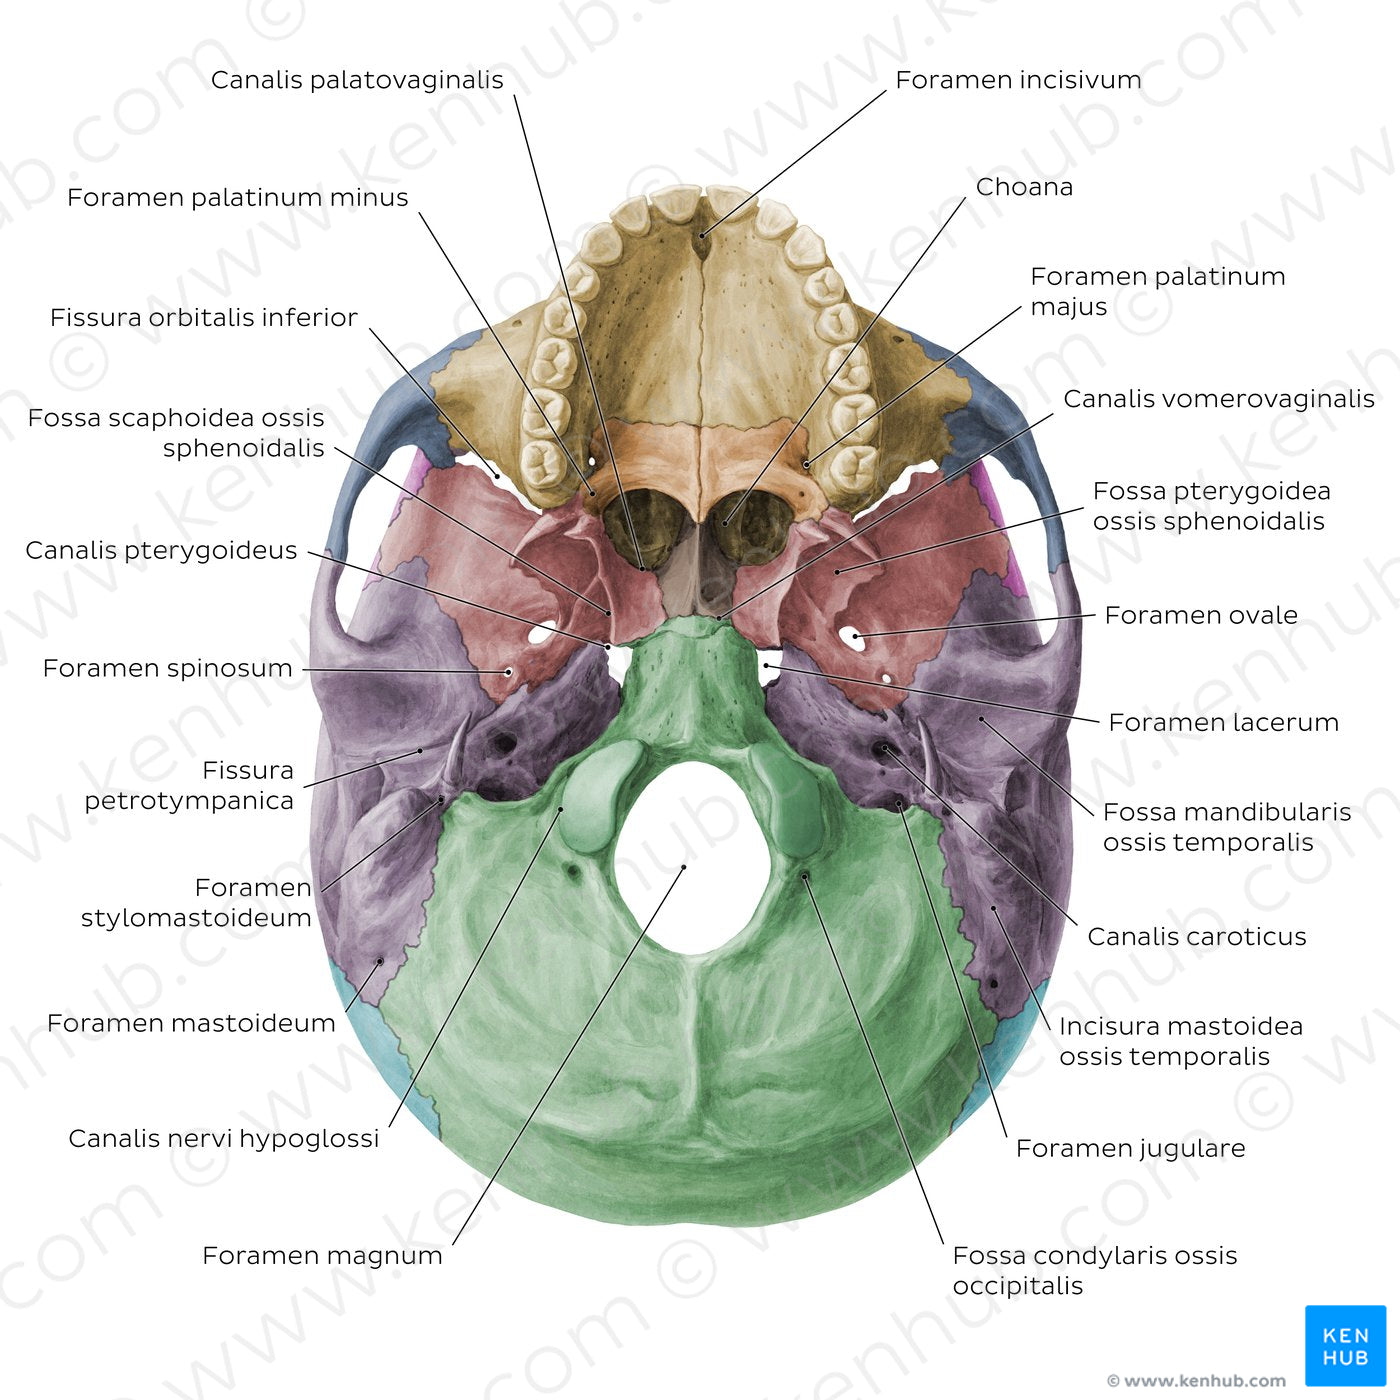 Inferior base of the skull - Foramina, fissures, and canals - Colored (Latin)